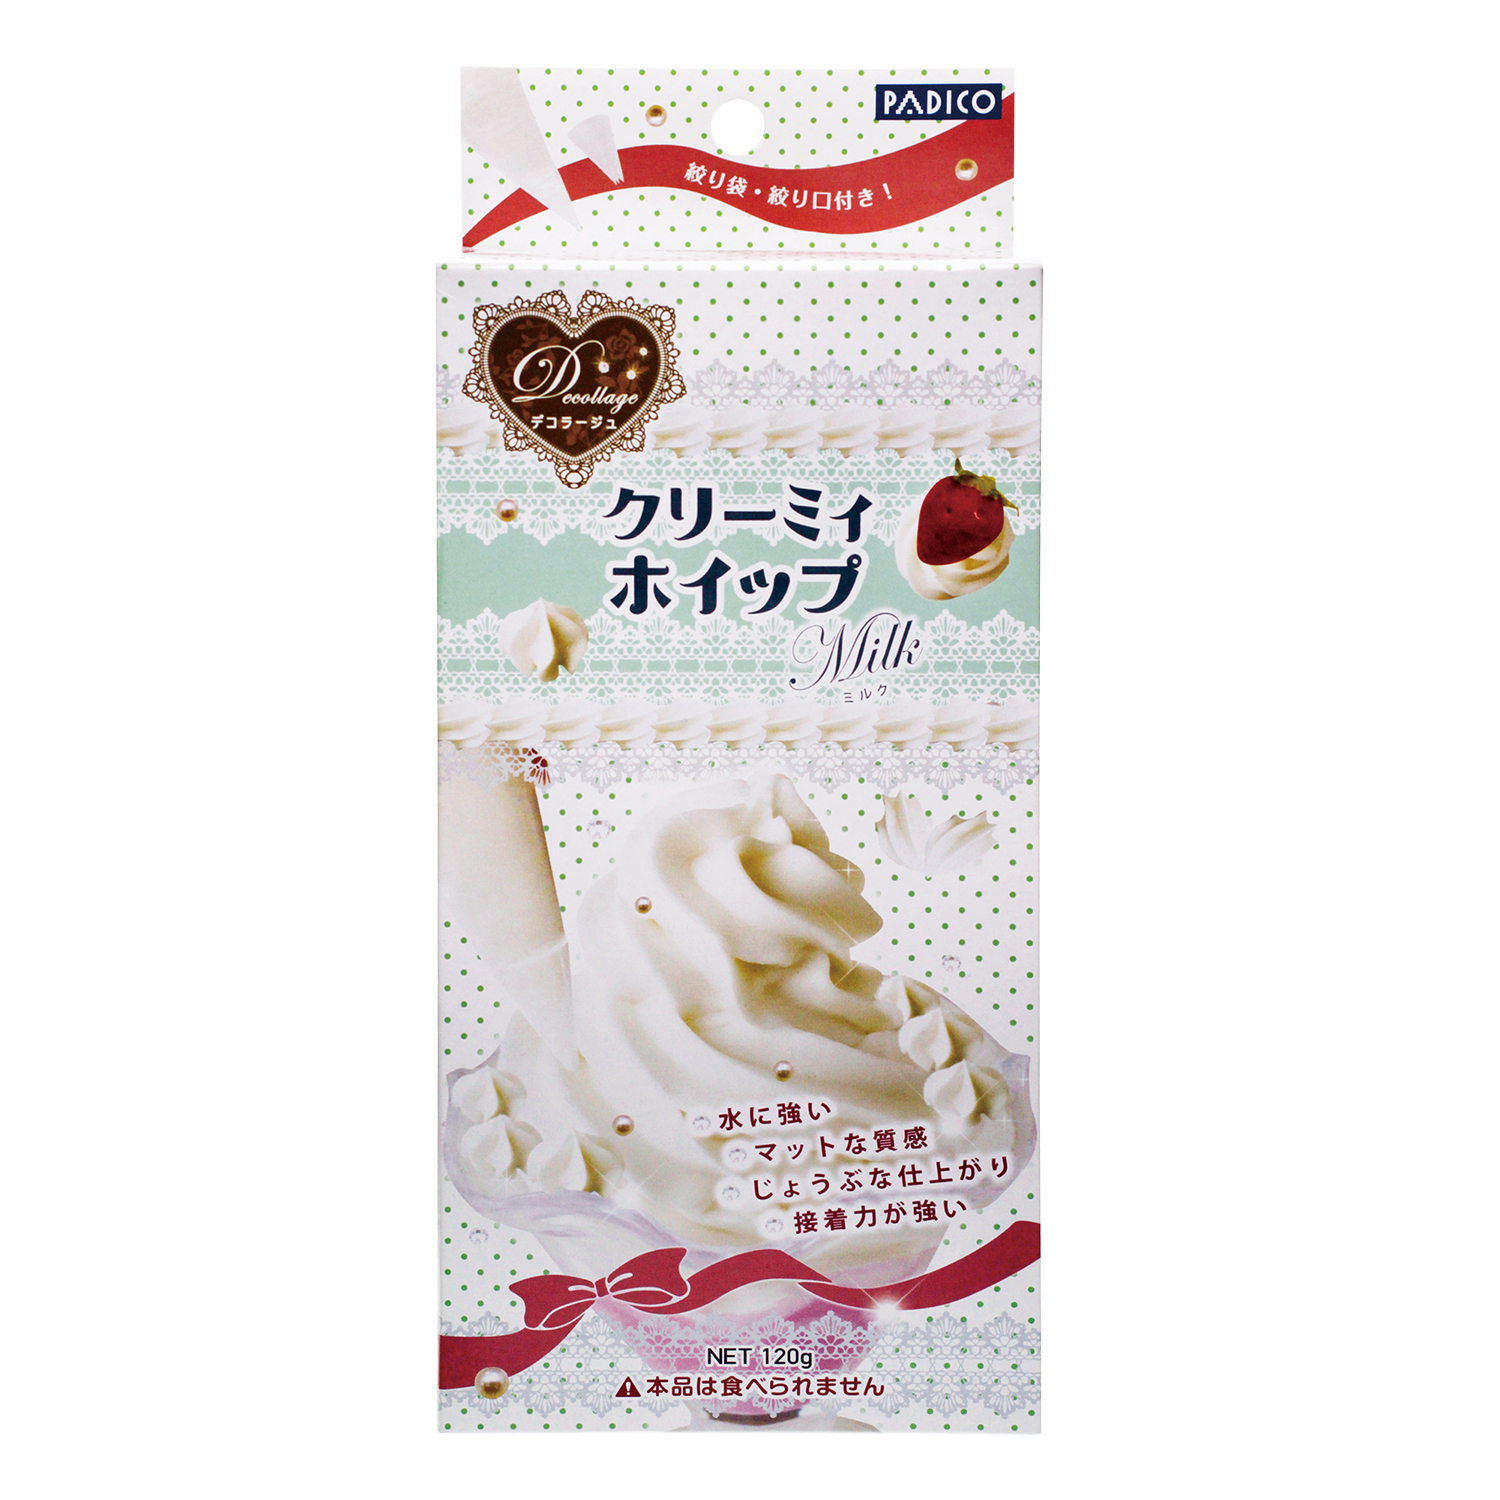 [Order upon demand, not returnable] PDC404102 Pajiko Creamy Whip (pcs)